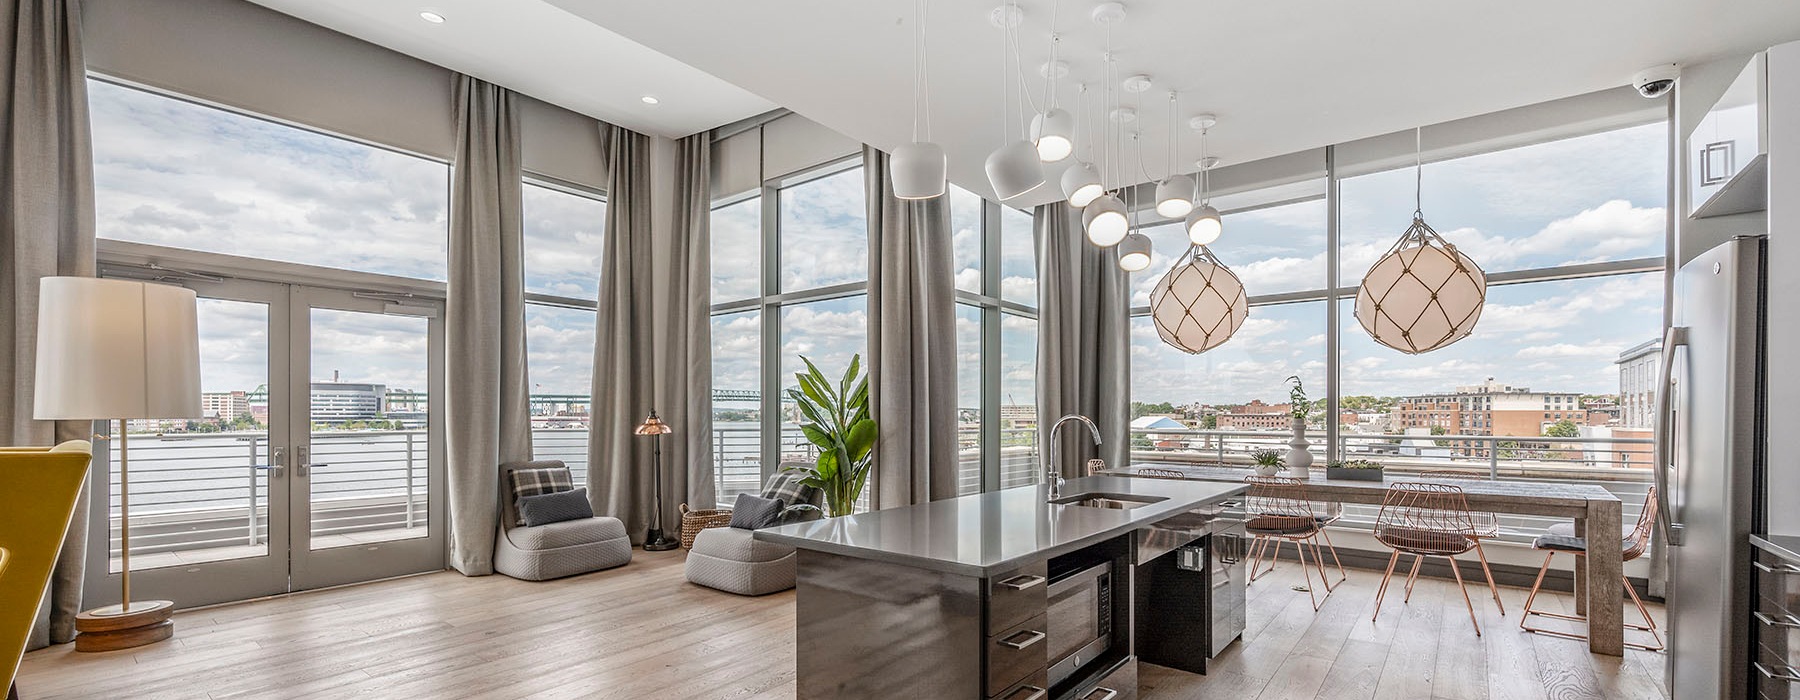 floor-to-ceiling windows brighten spacious, open concept clubhouse